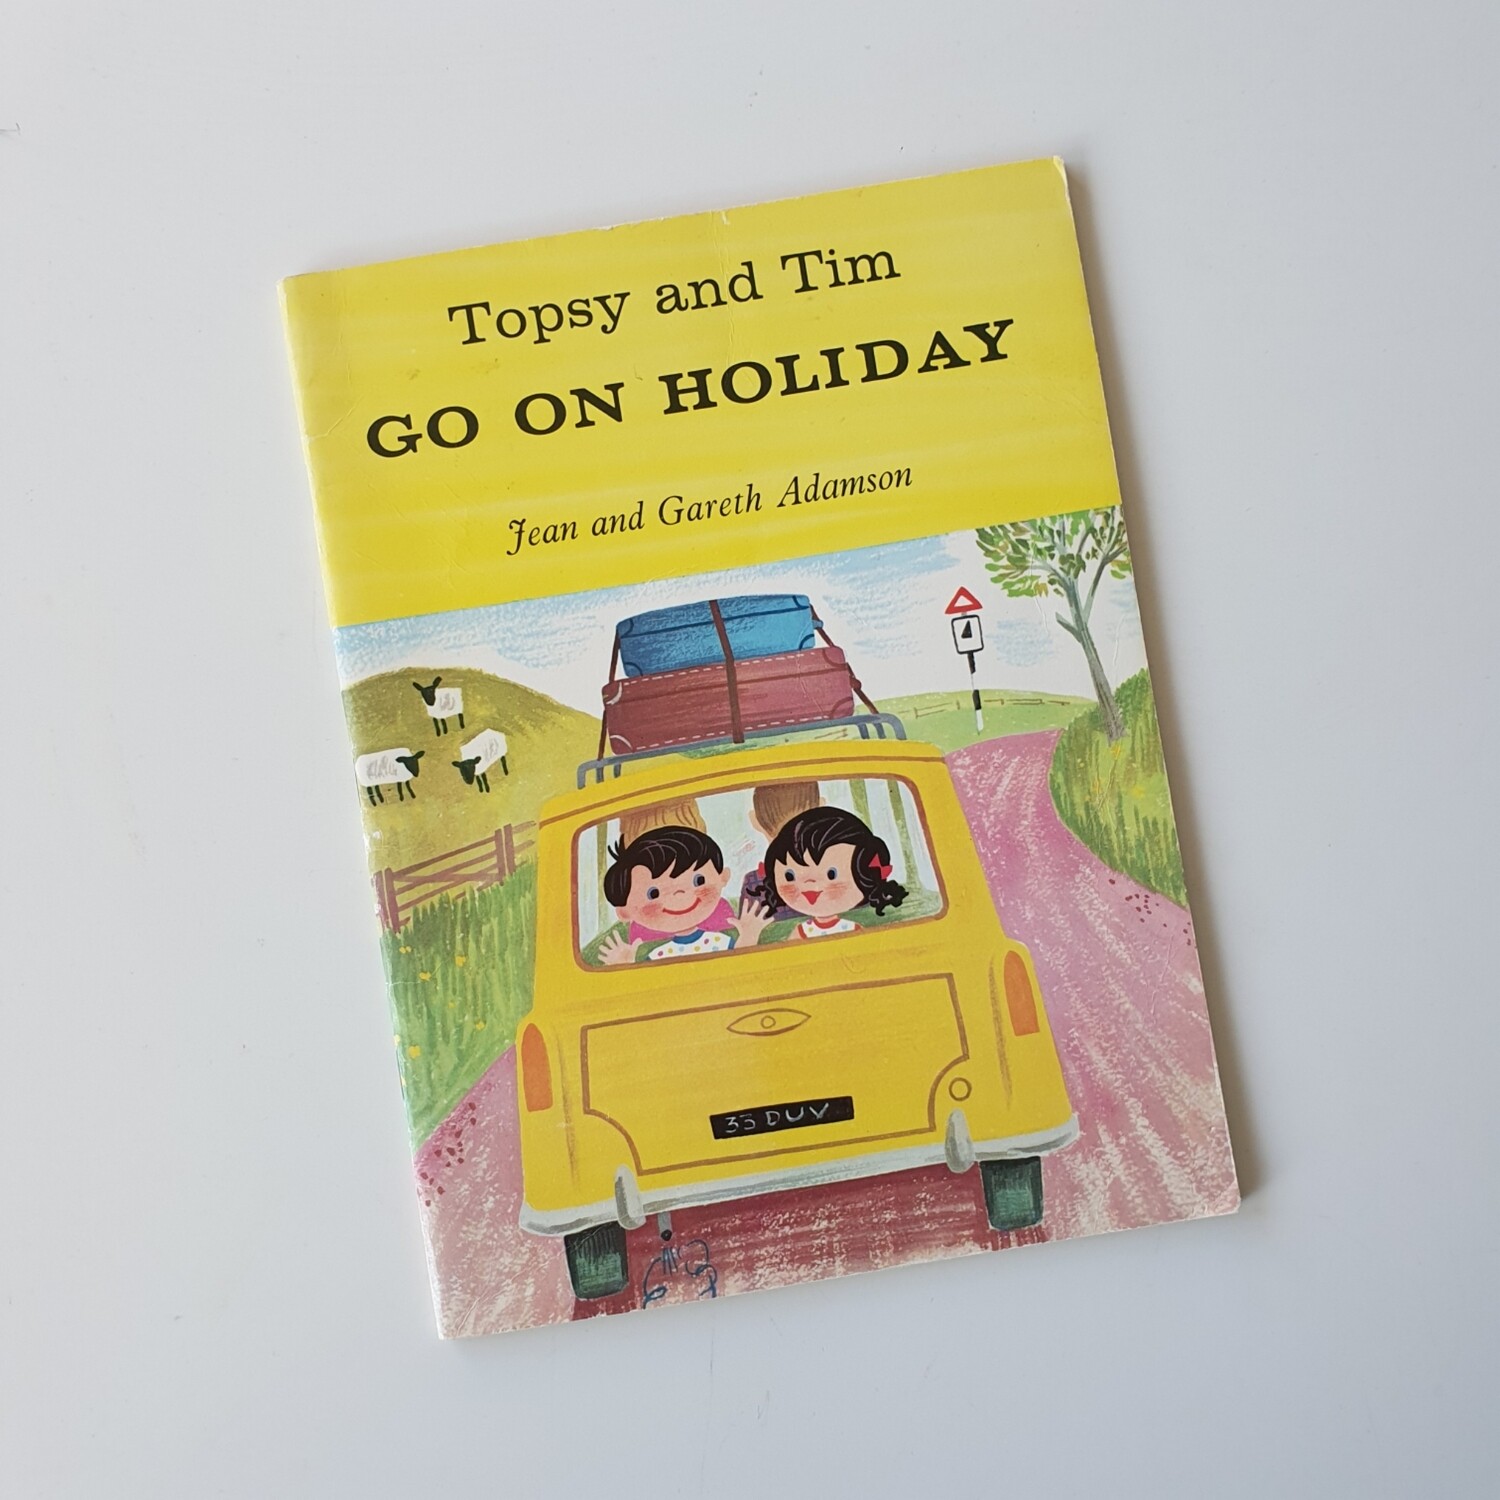 Topsy and Tim Go on Holiday - made from a paperback book - comes with metal book corners